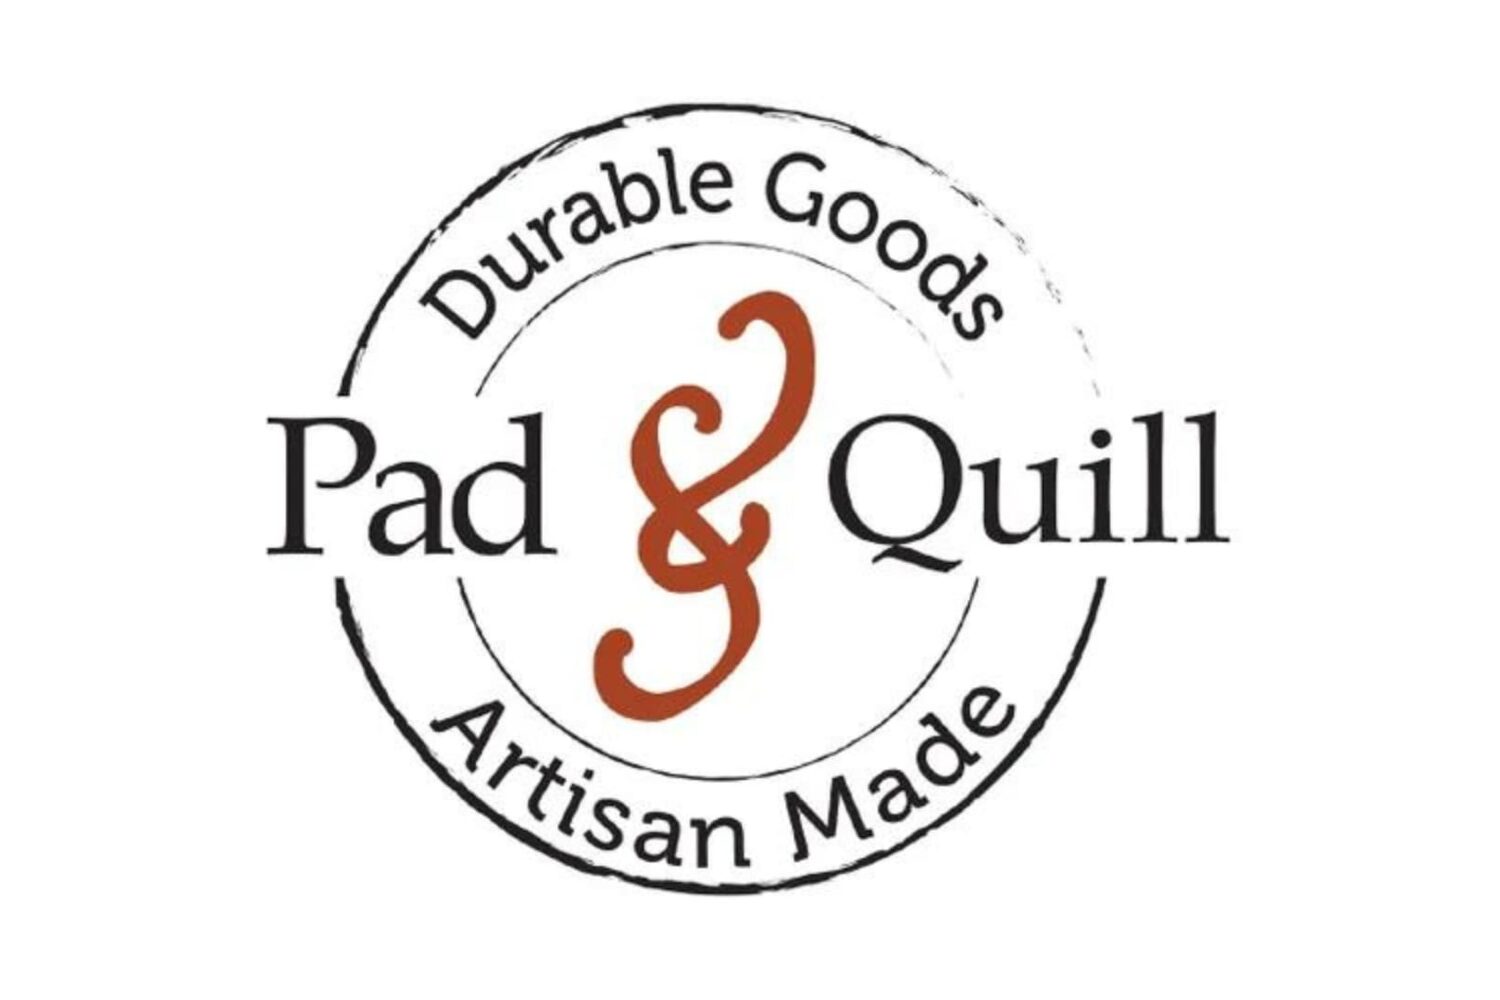 Pad & Quill logo.